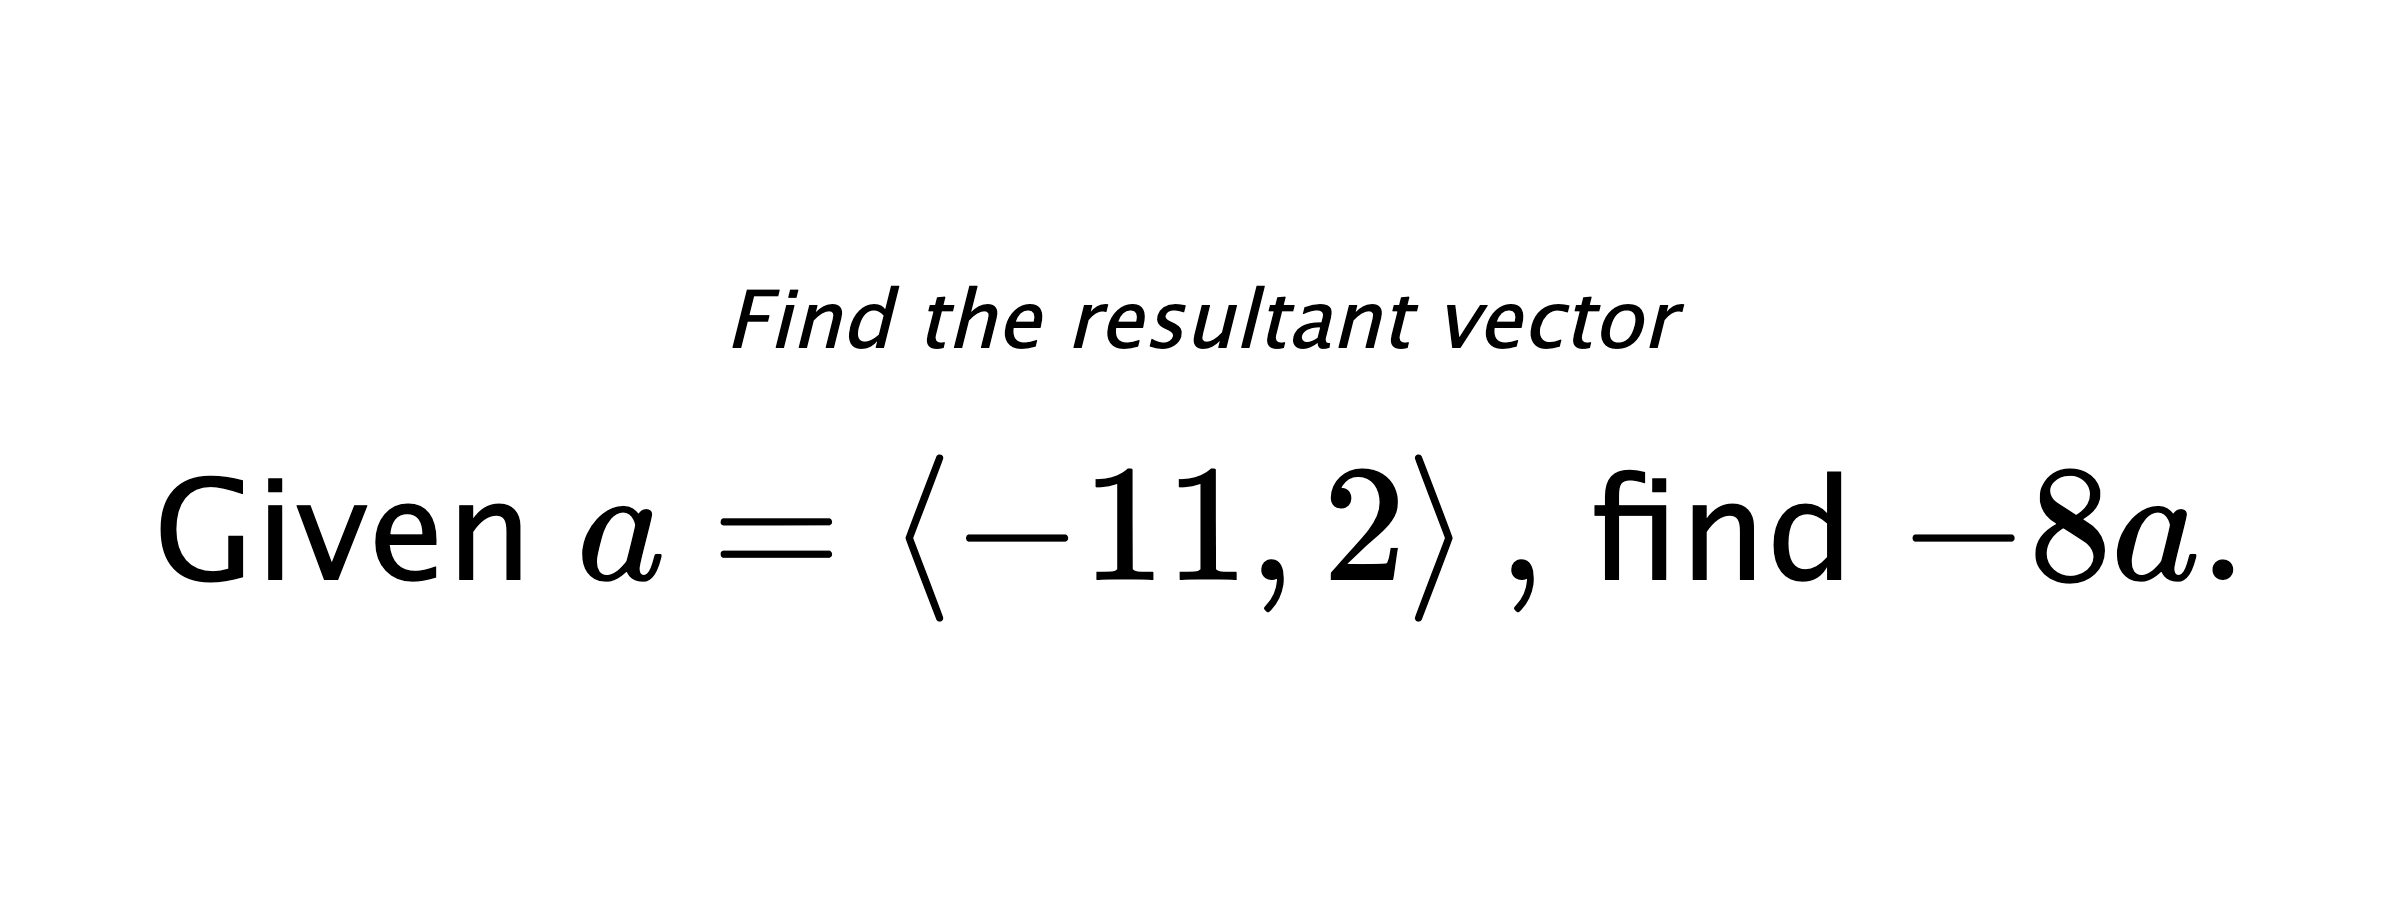 Find the resultant vector Given $ a = \left< -11,2 \right> ,$ find $ -8a .$